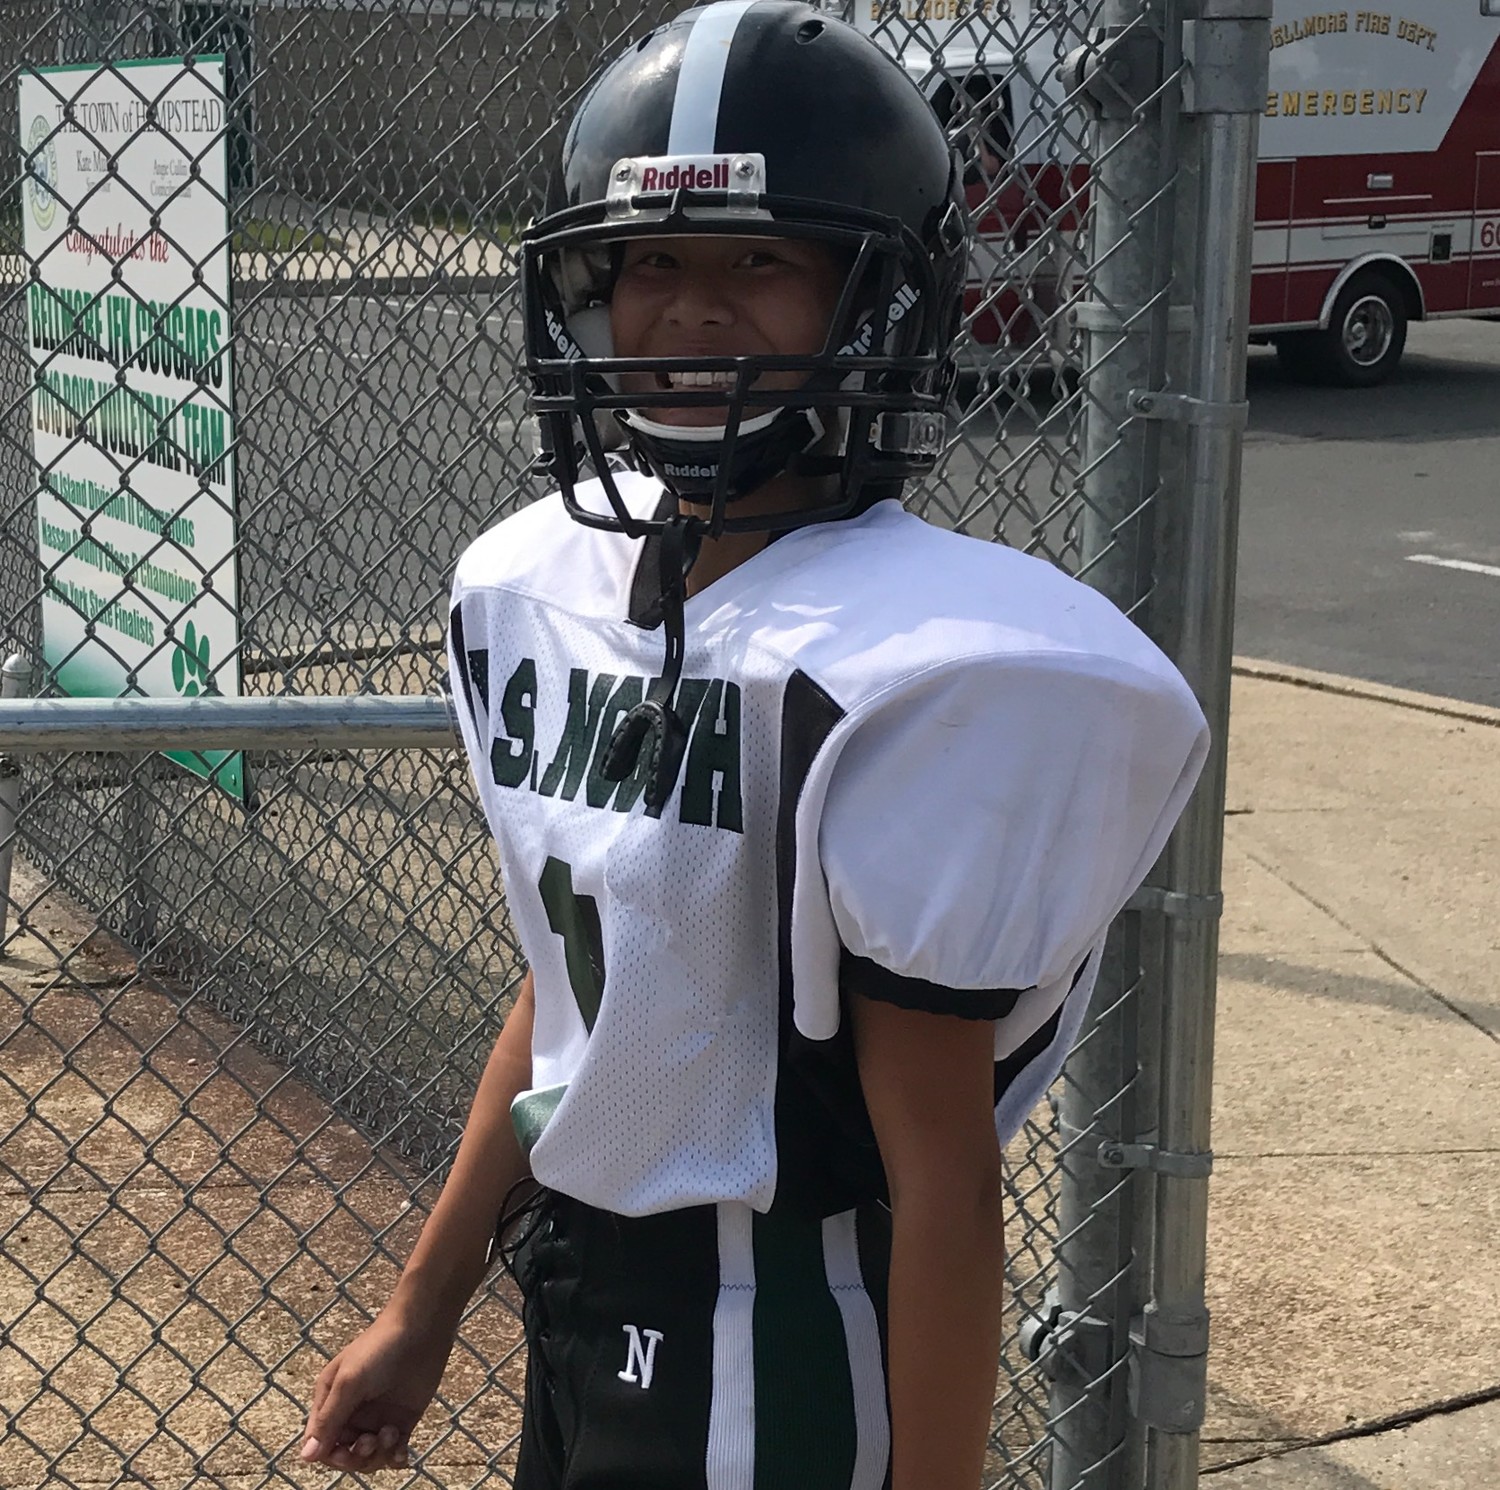 Nicole Aresta started her football career this fall as a wide receiver and cornerback for the Valley Stream North junior varsity team.